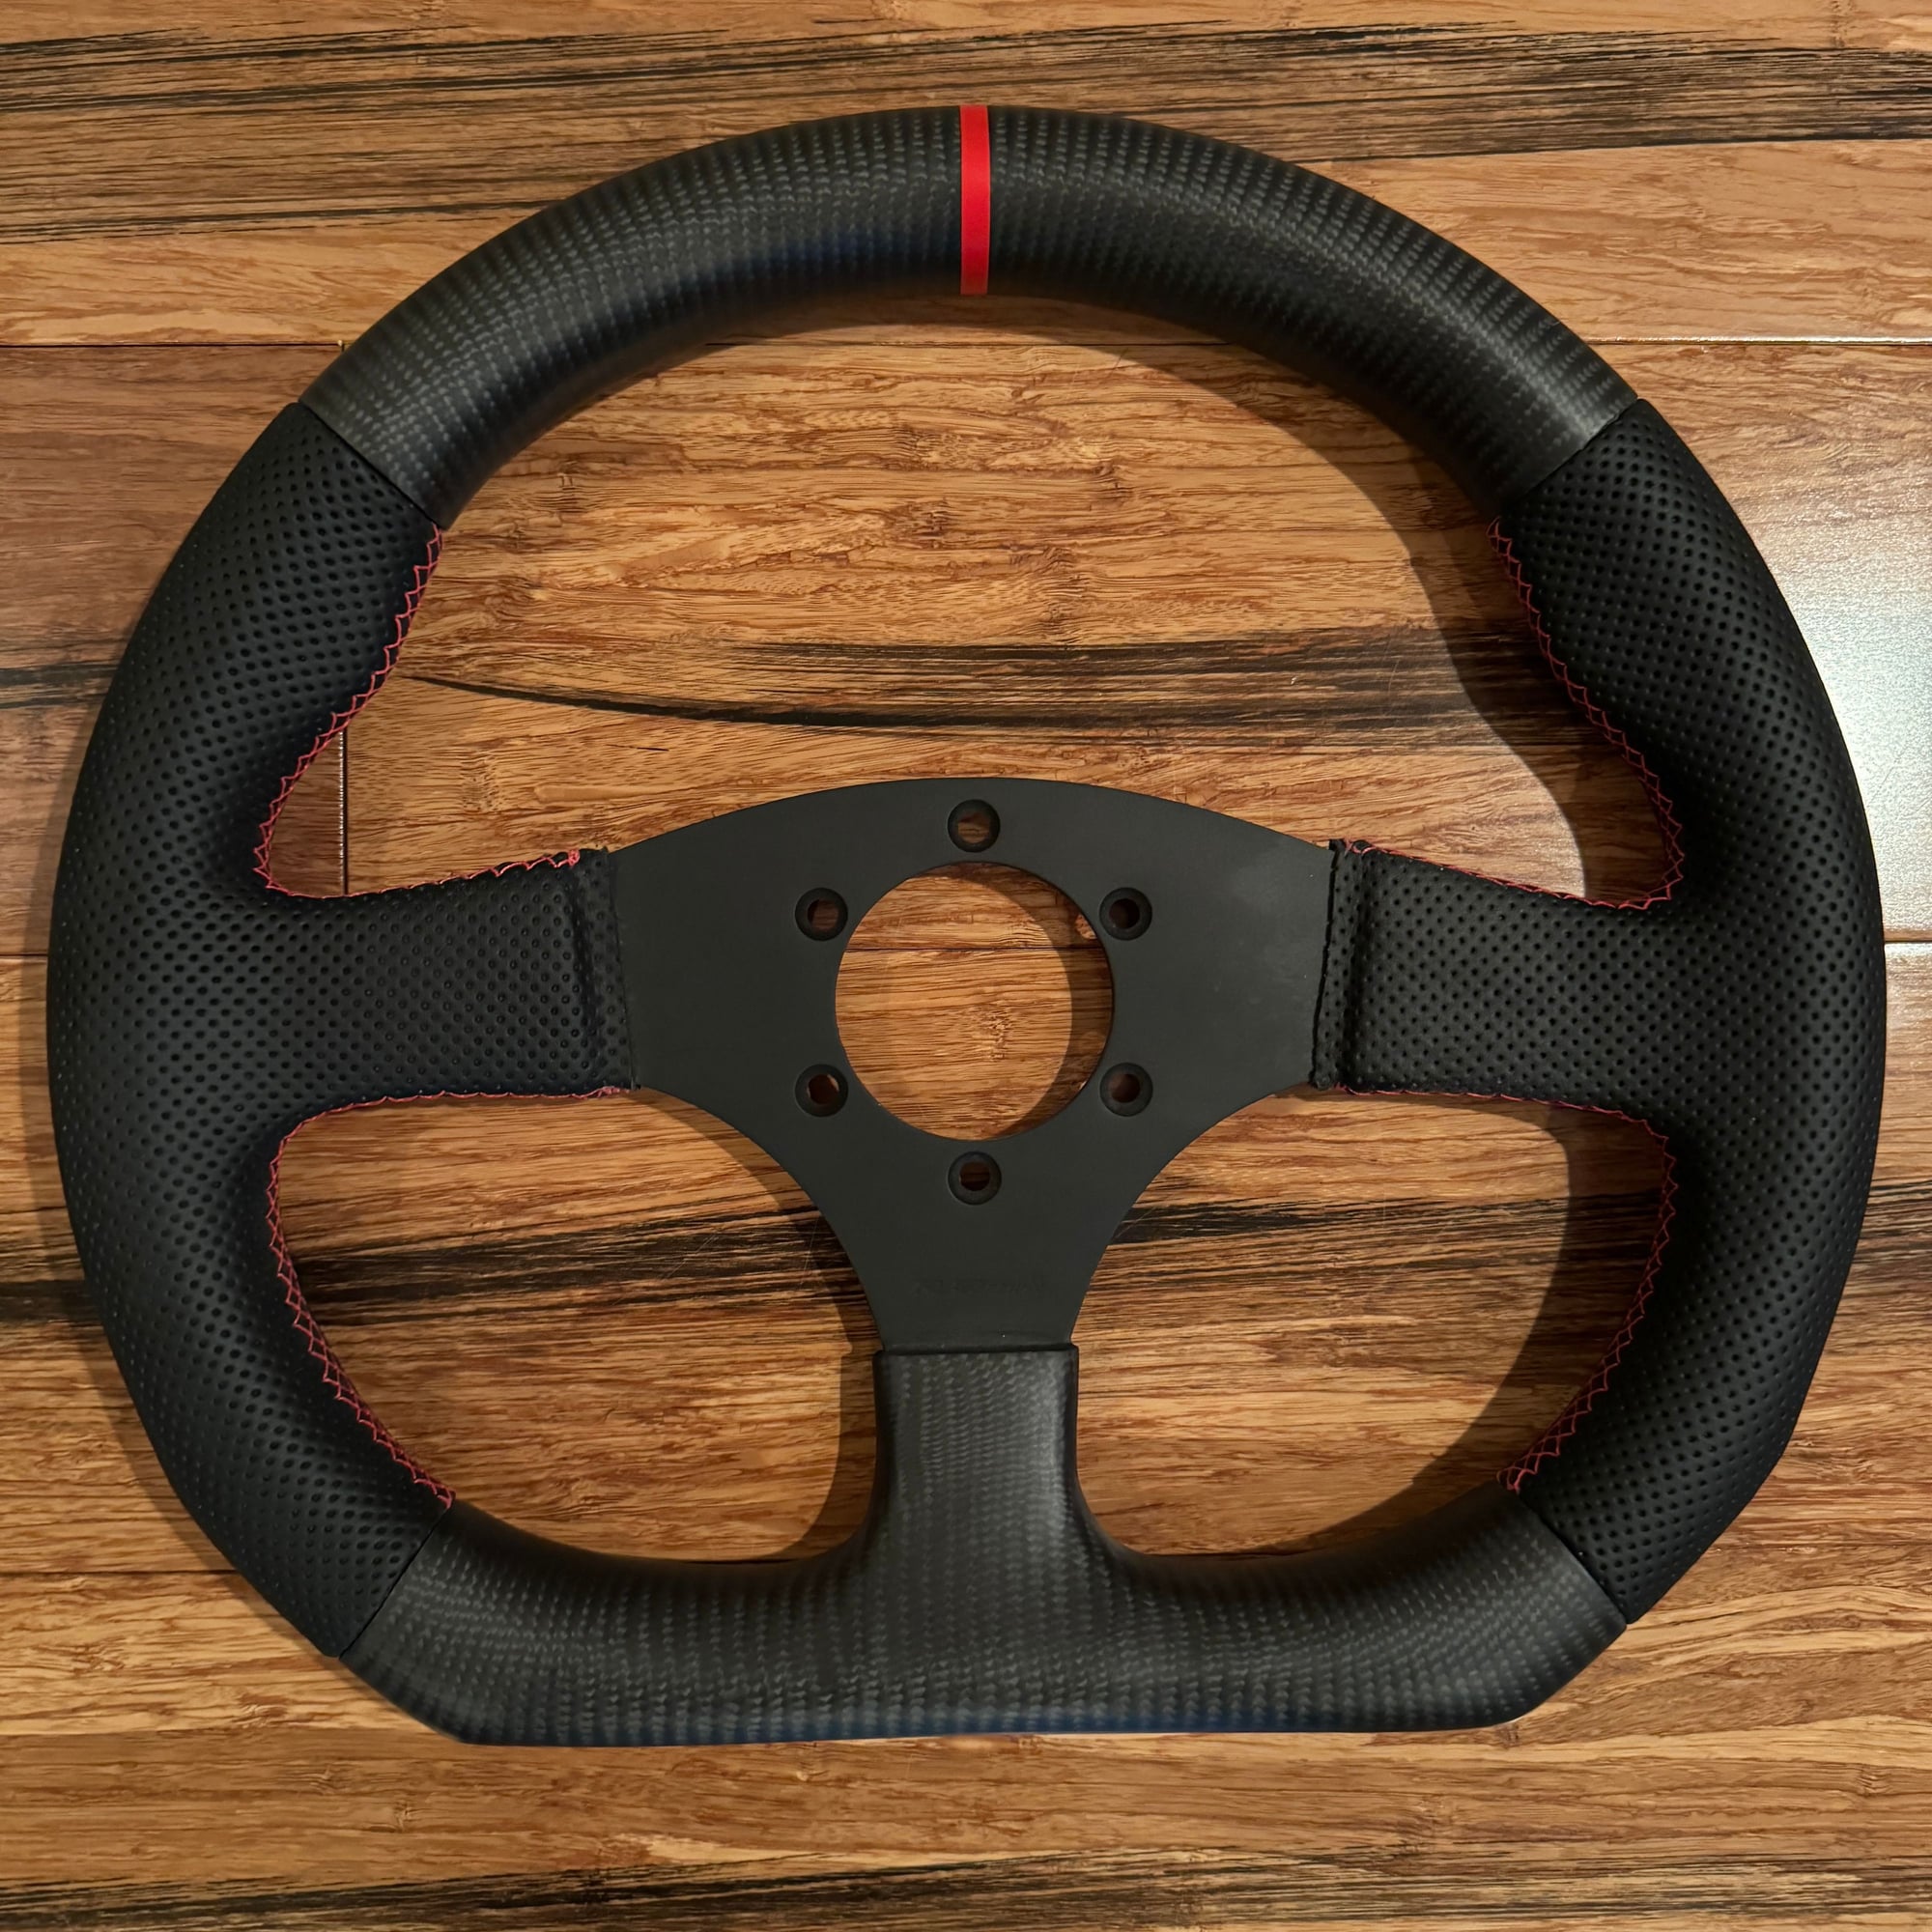 Interior/Upholstery - MAZDASPEED & RE-A Carbon Steering Wheels - New - 1993 to 2002 Mazda RX-7 - Birmingham, MI 48323, United States